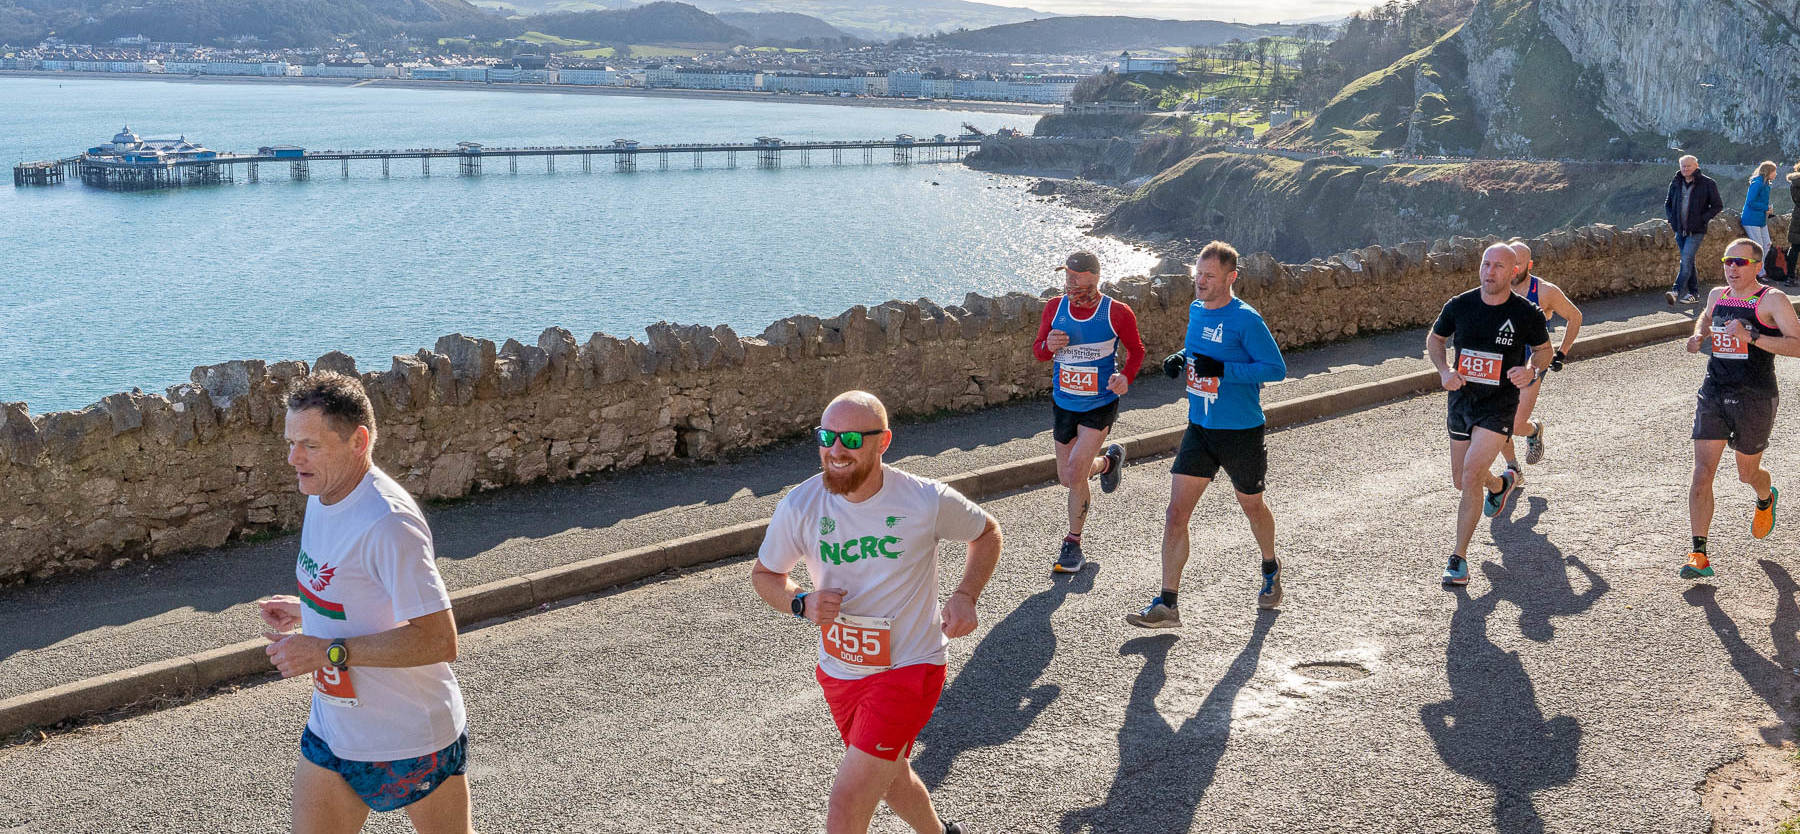 Runners on the Great Orme with Llandudno Pier in view